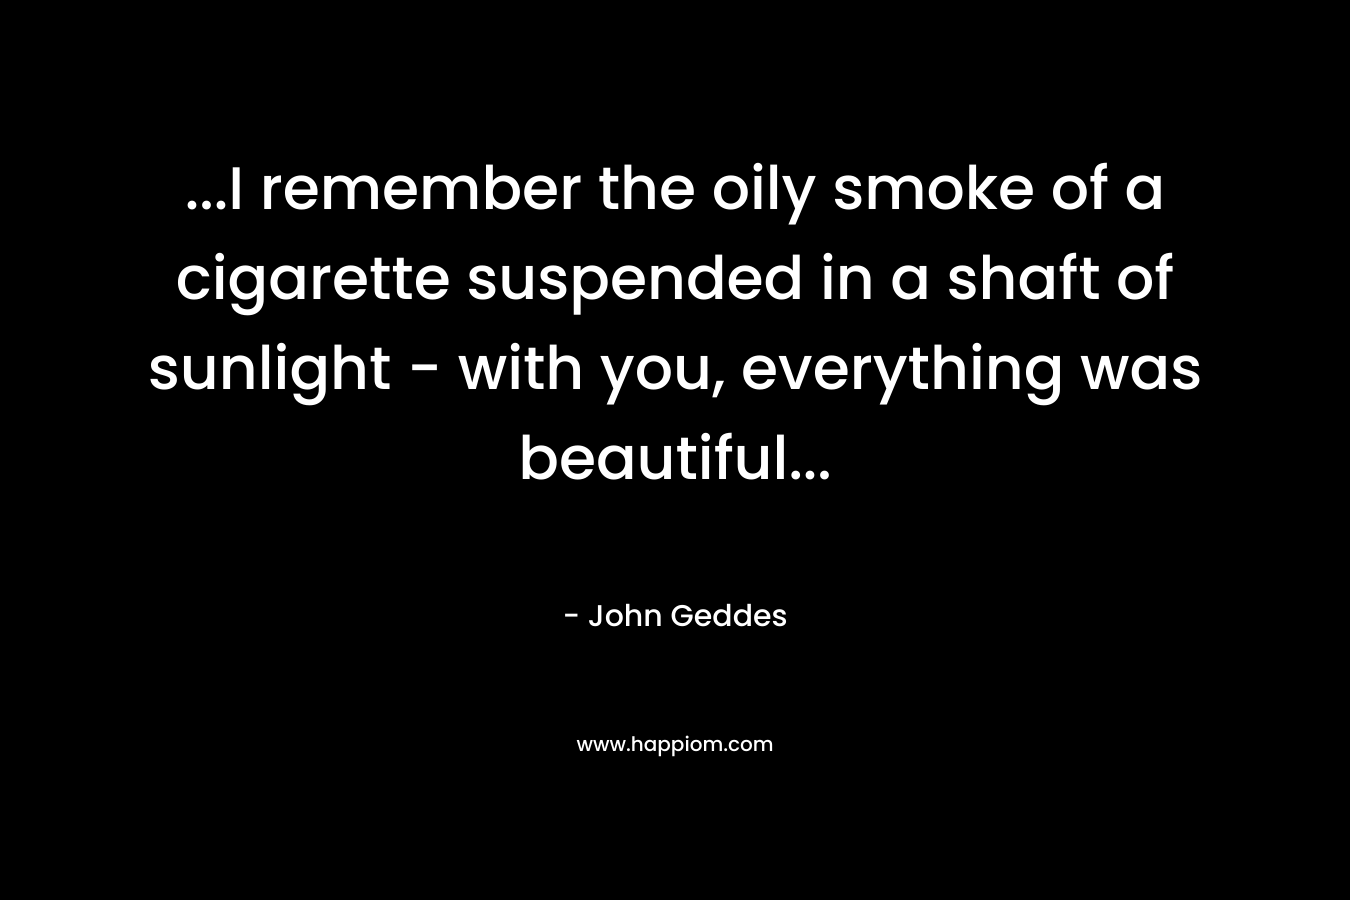 ...I remember the oily smoke of a cigarette suspended in a shaft of sunlight - with you, everything was beautiful...